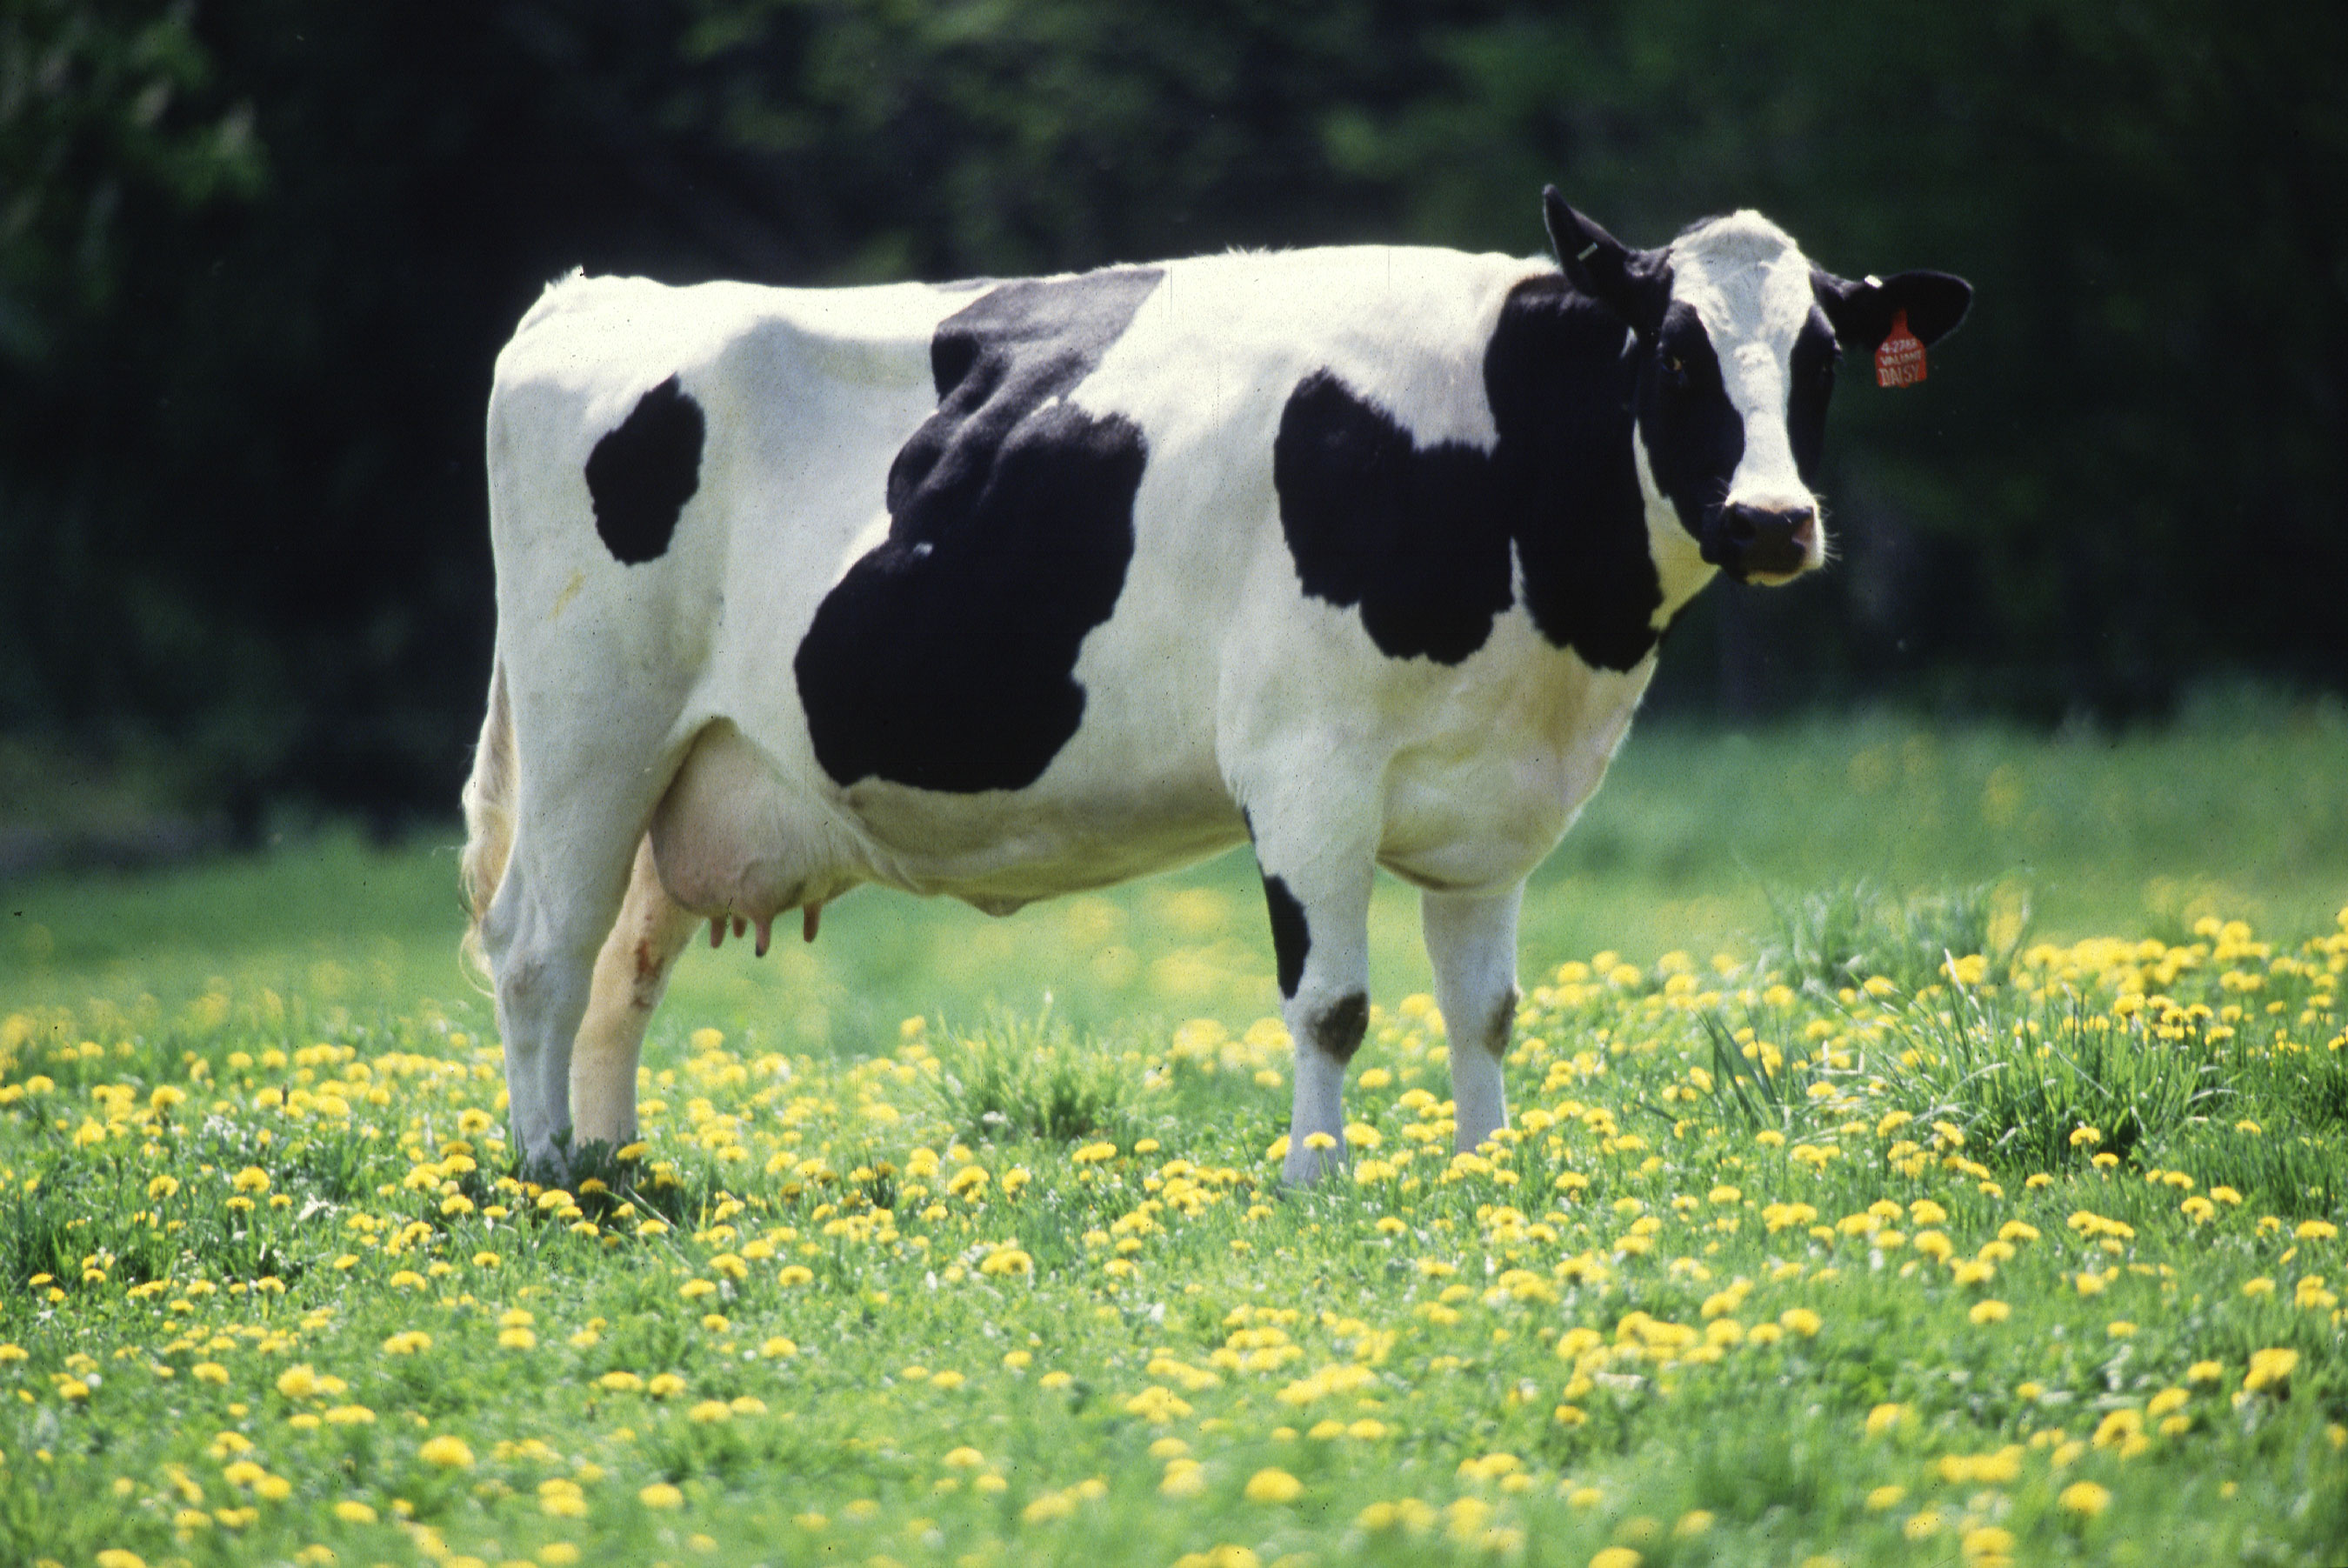 North-east Scotland dairy study reports strong interest in specialist food production